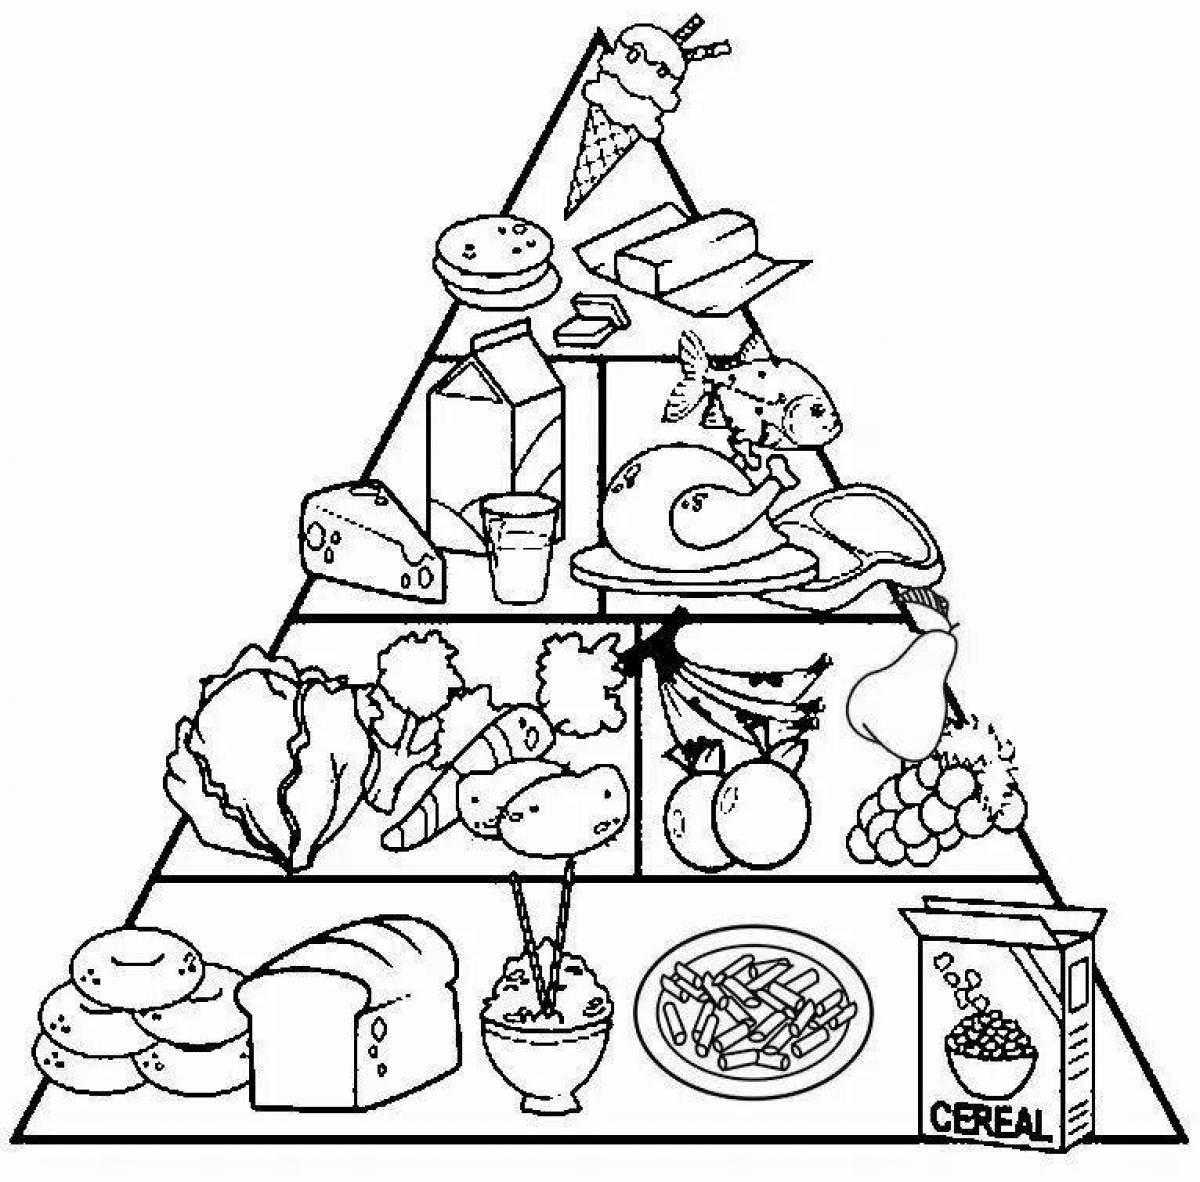 Fun coloring book healthy food for kids